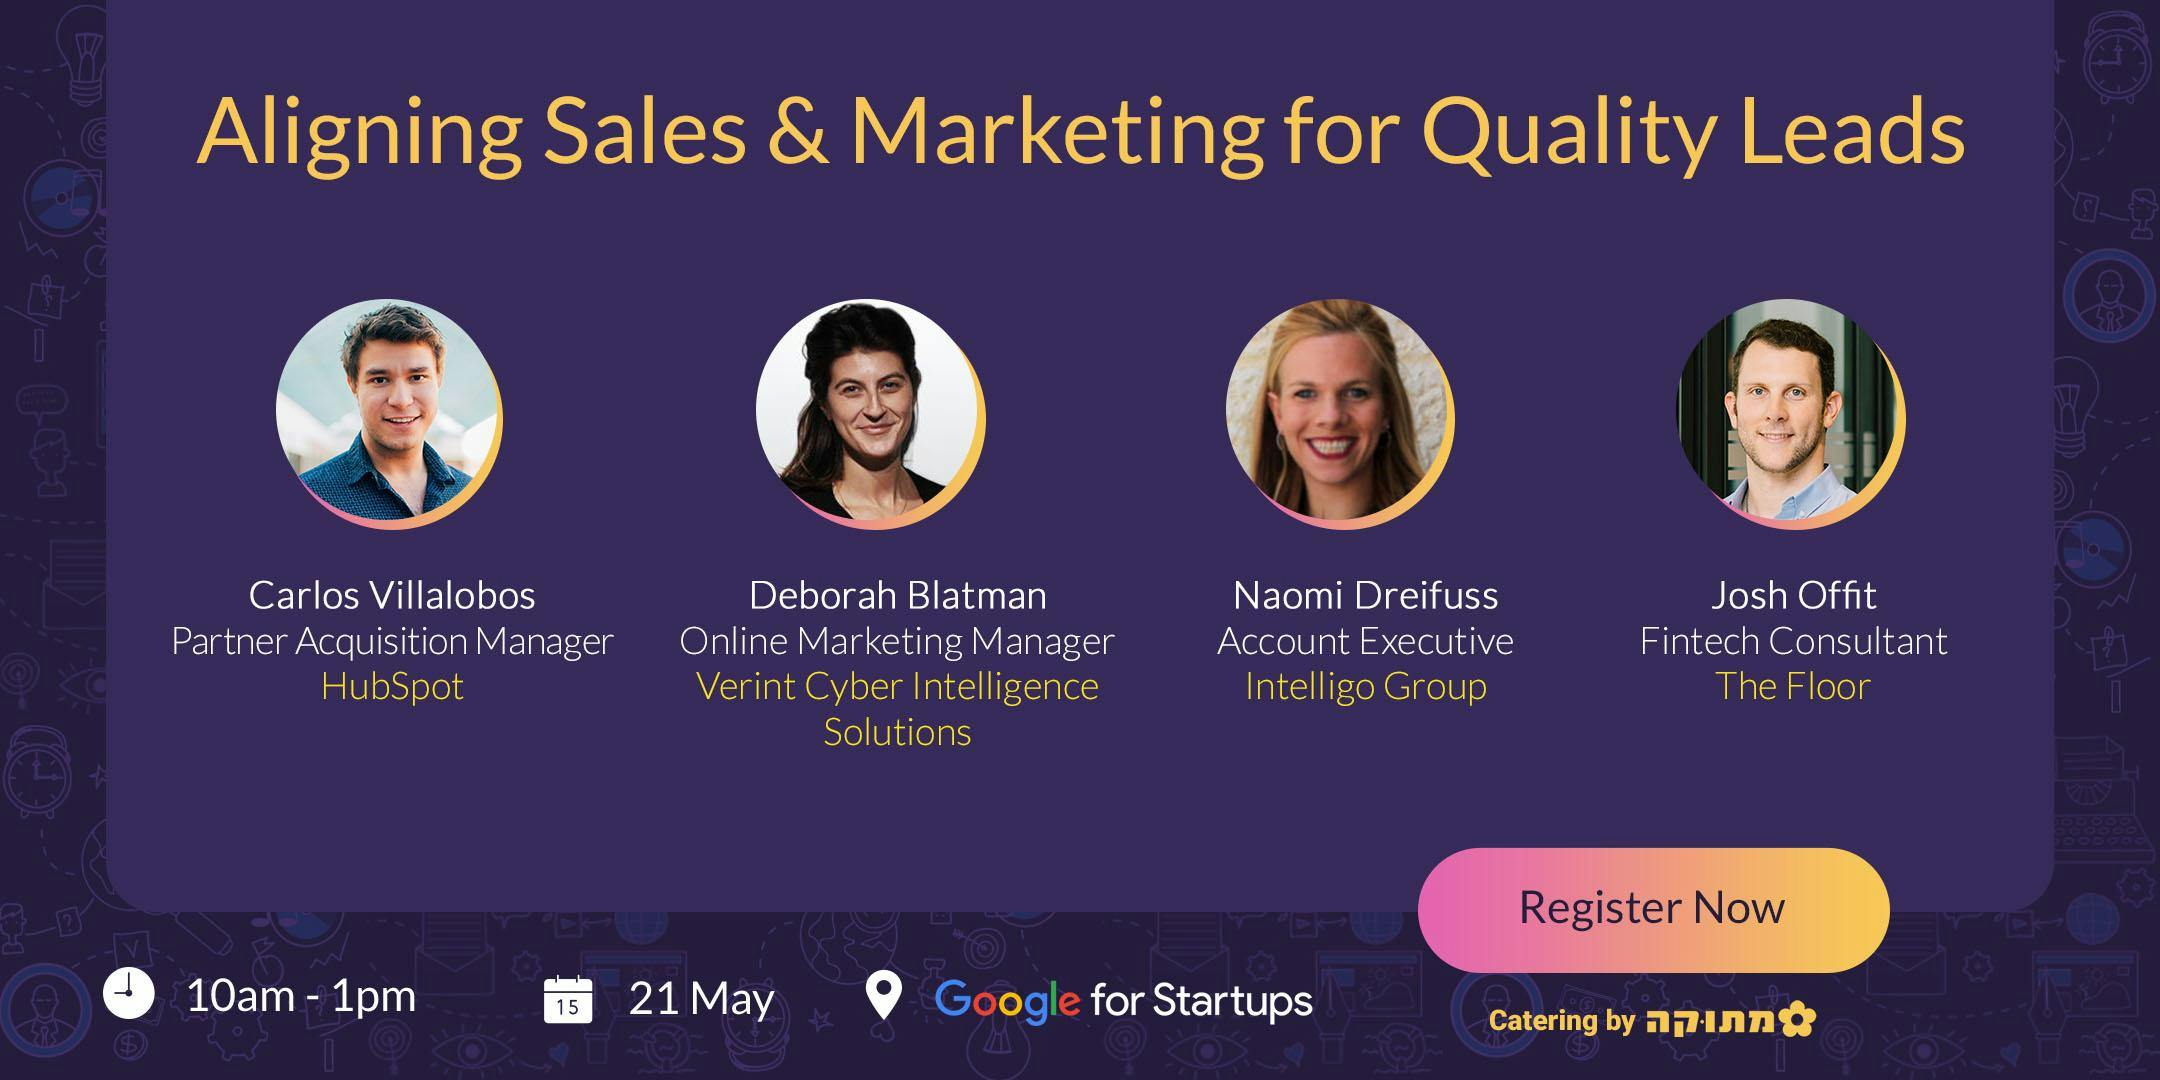 Aligning Sales & Marketing for Quality Leads